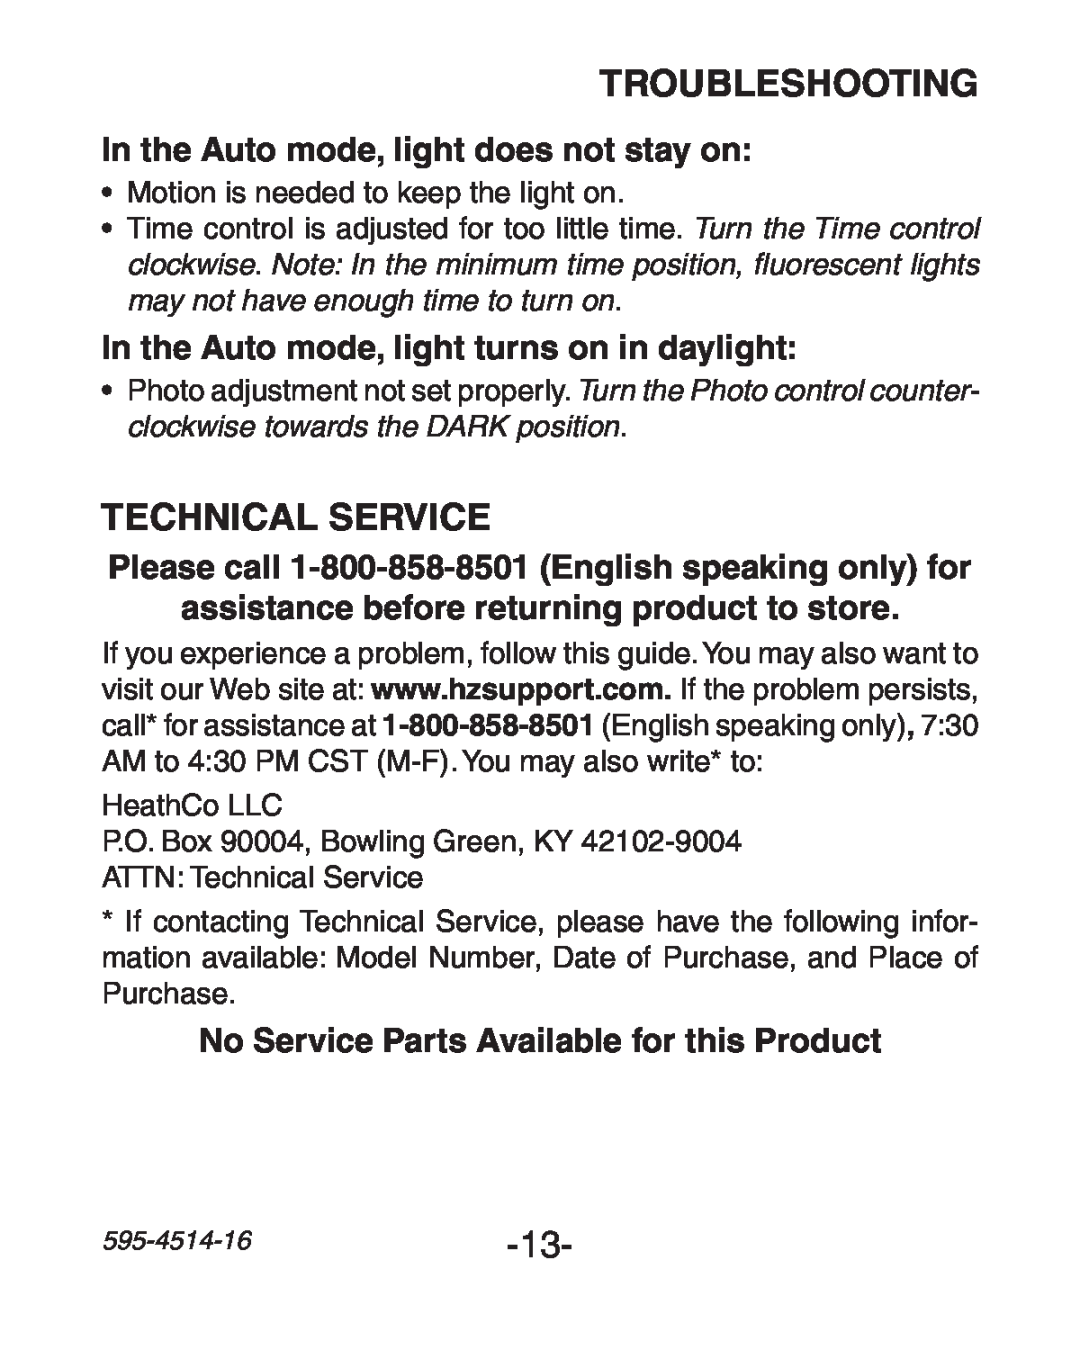 Heath Zenith 6107 Technical Service, In the Auto mode, light does not stay on, No Service Parts Available for this Product 